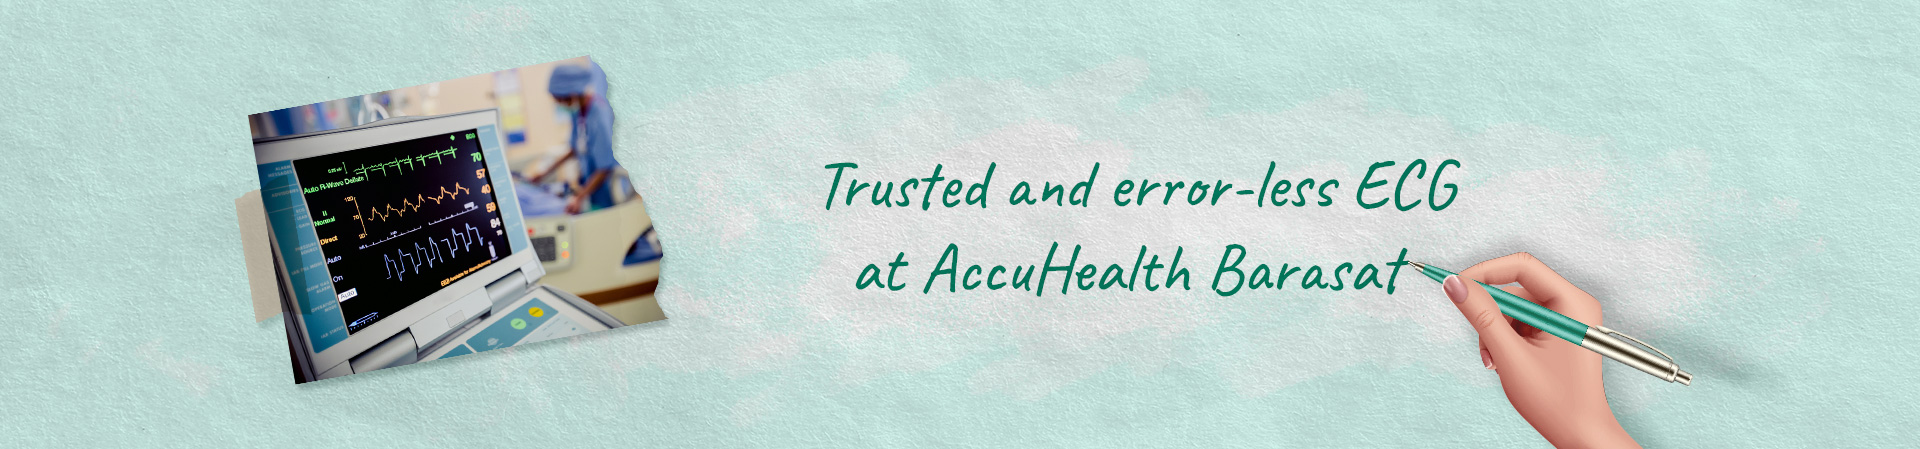 ECG Test in AccuHealth Barasat: The Simplest & Fastest Tests Used to Evaluate Your Heart